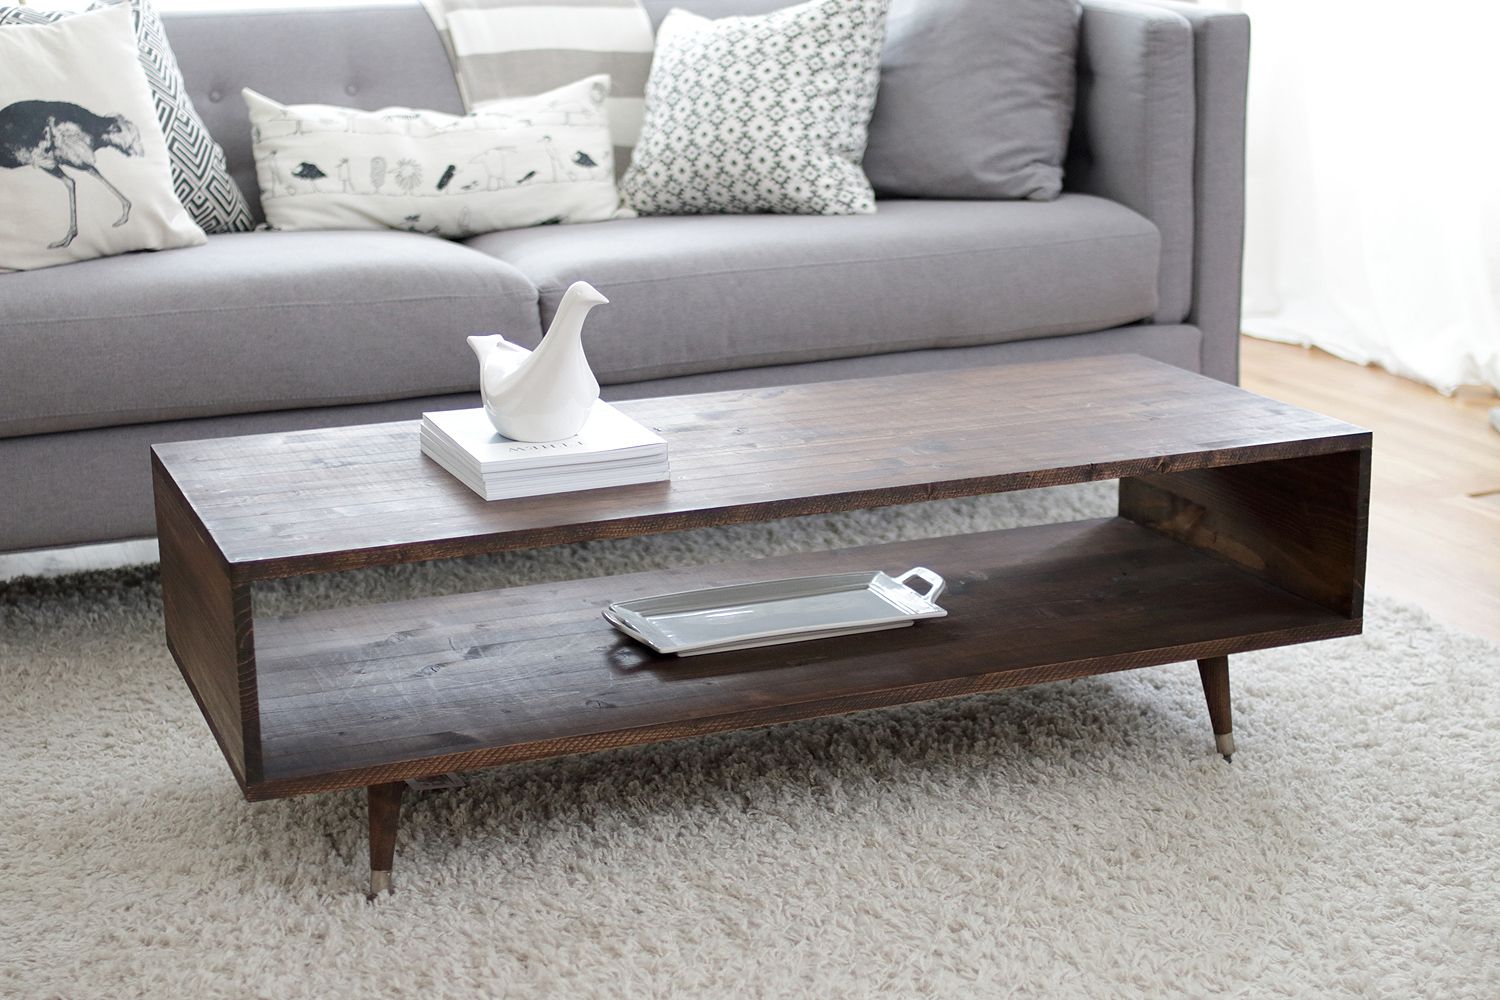 Build Your Own Mid Century Modern Coffee Table For $60 – Bay On A Budget With Regard To Mid Century Modern Coffee Tables (View 14 of 15)